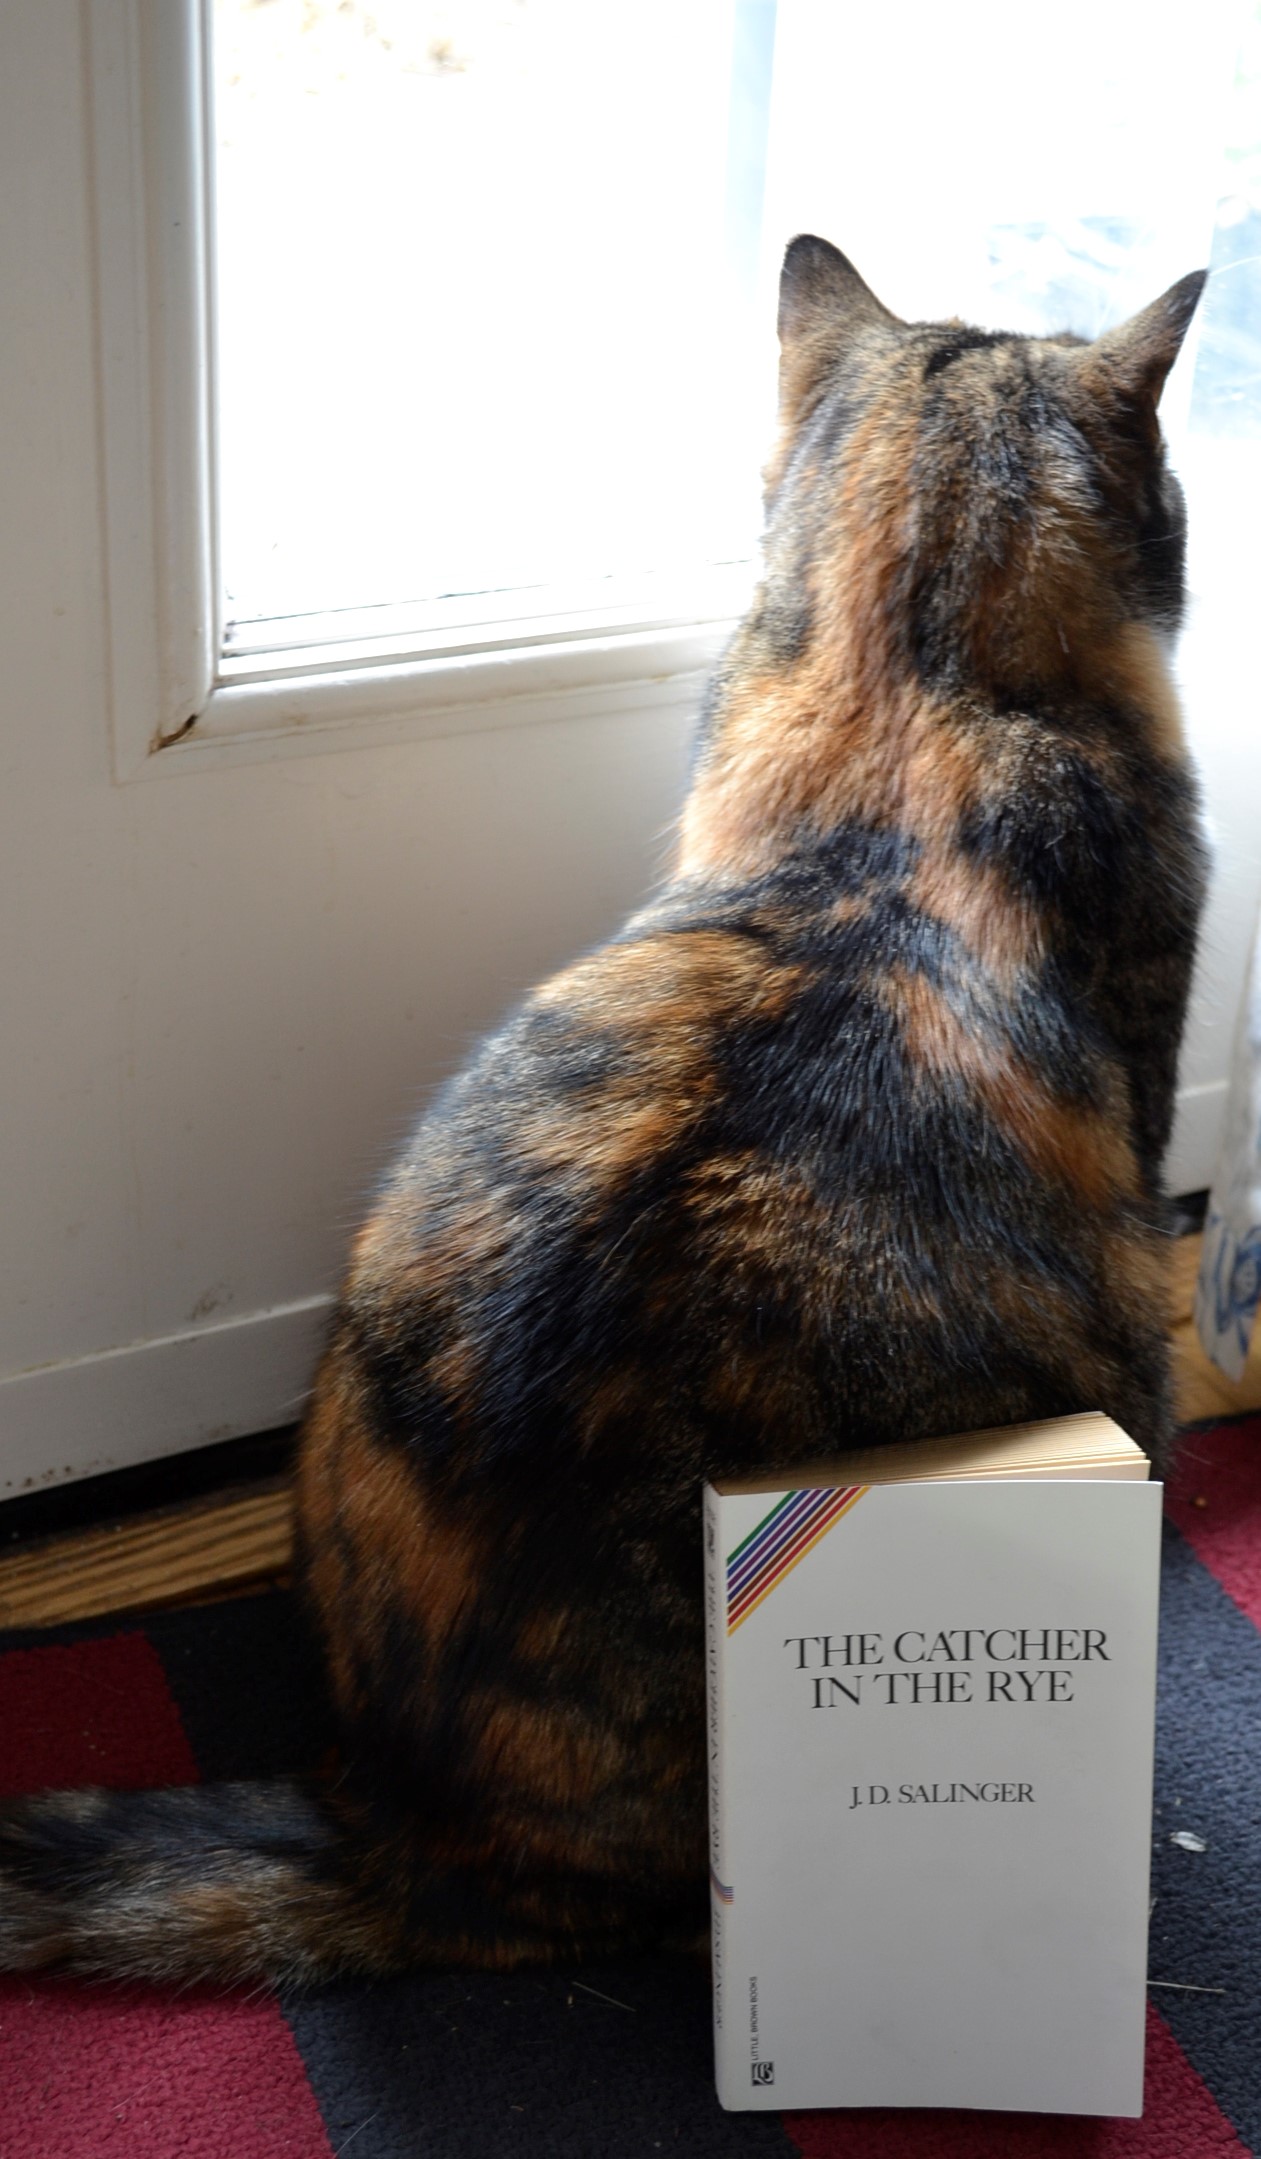 The Catcher in the Rye sits against the flank of a calico tabby.